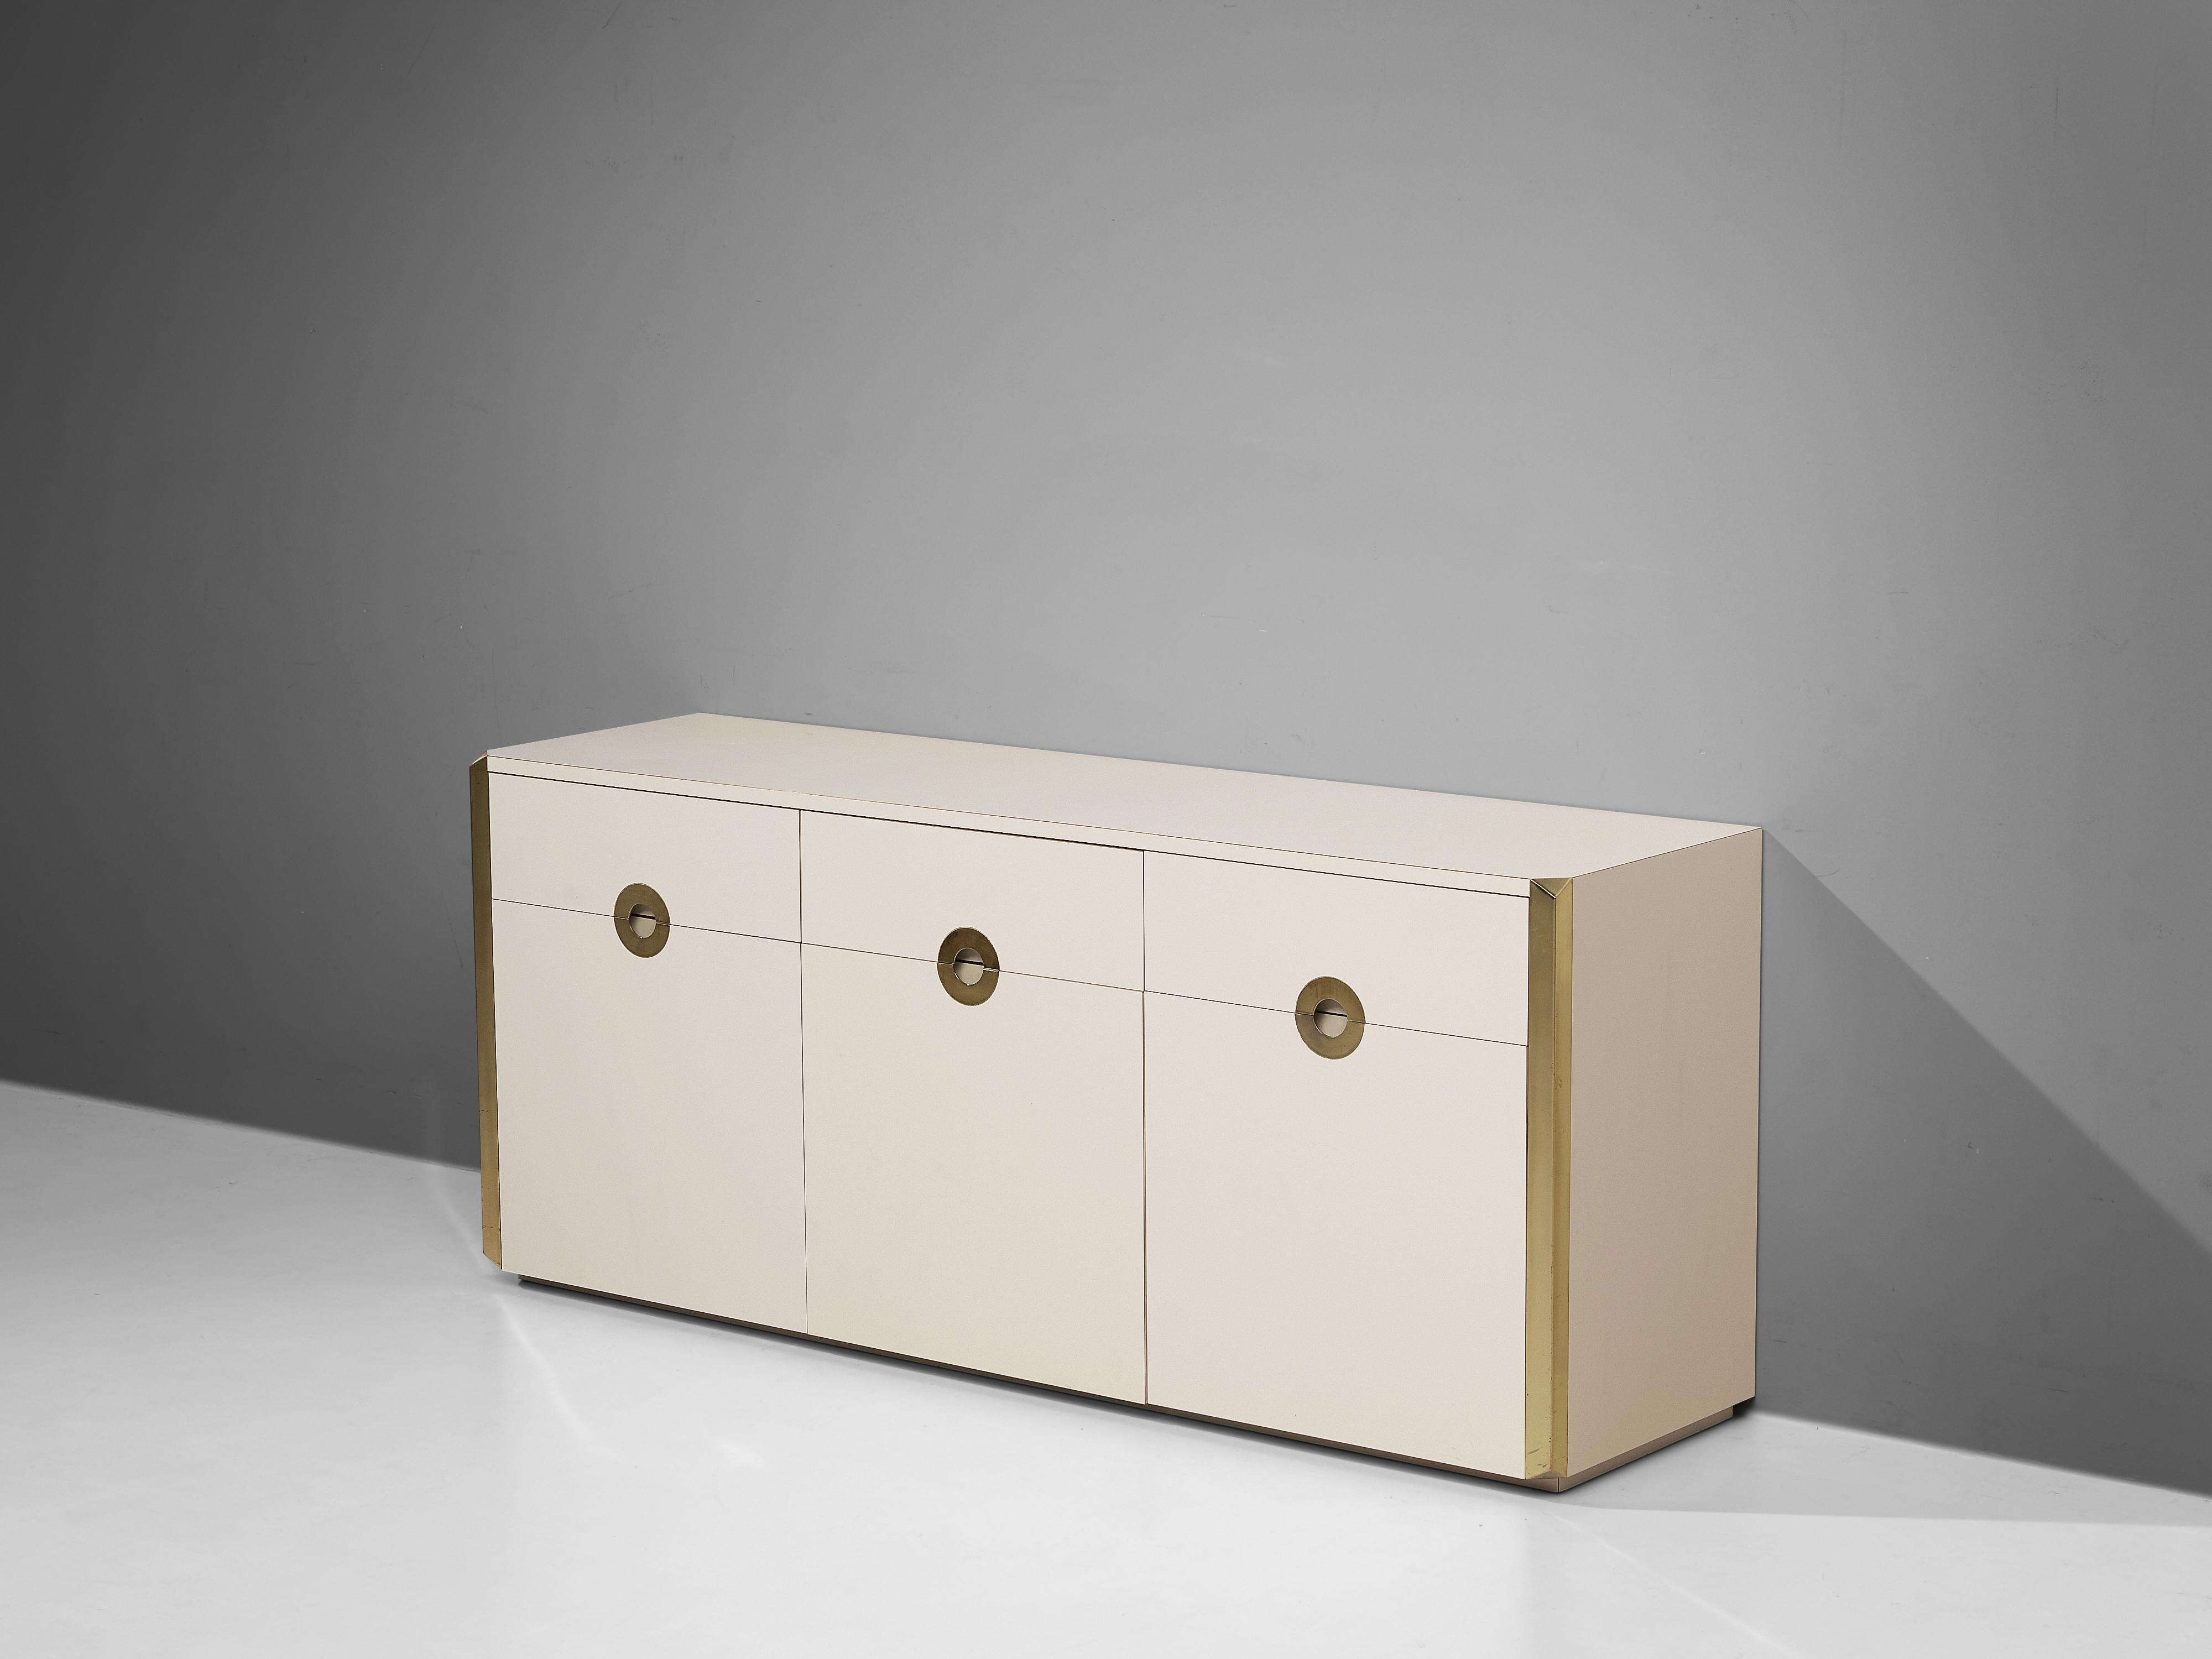 In style of Willy Rizzo for Mario Sabot, sideboard, white laminate, chromed metal, Italy, 1970s

This expressive sideboard is beautifully constructed where aesthetics and functionally come hand in hand. The front holds the characteristics of the